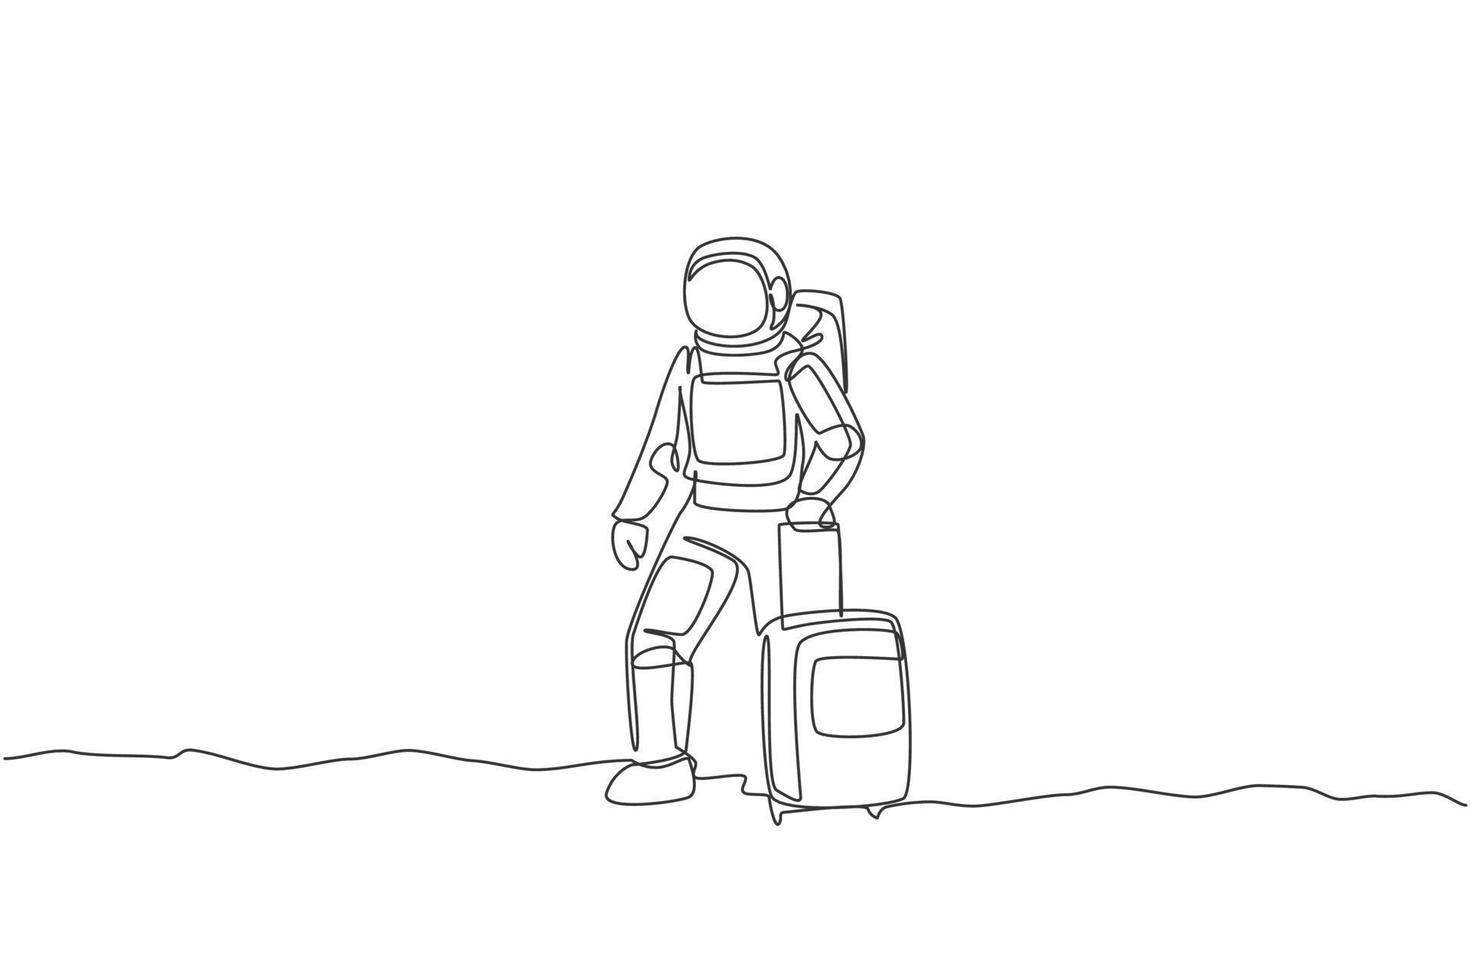 Single continuous line drawing of young astronaut carrying luggage bag want to travel in moon surface. Space man cosmic galaxy concept. Trendy one line draw design graphic vector illustration